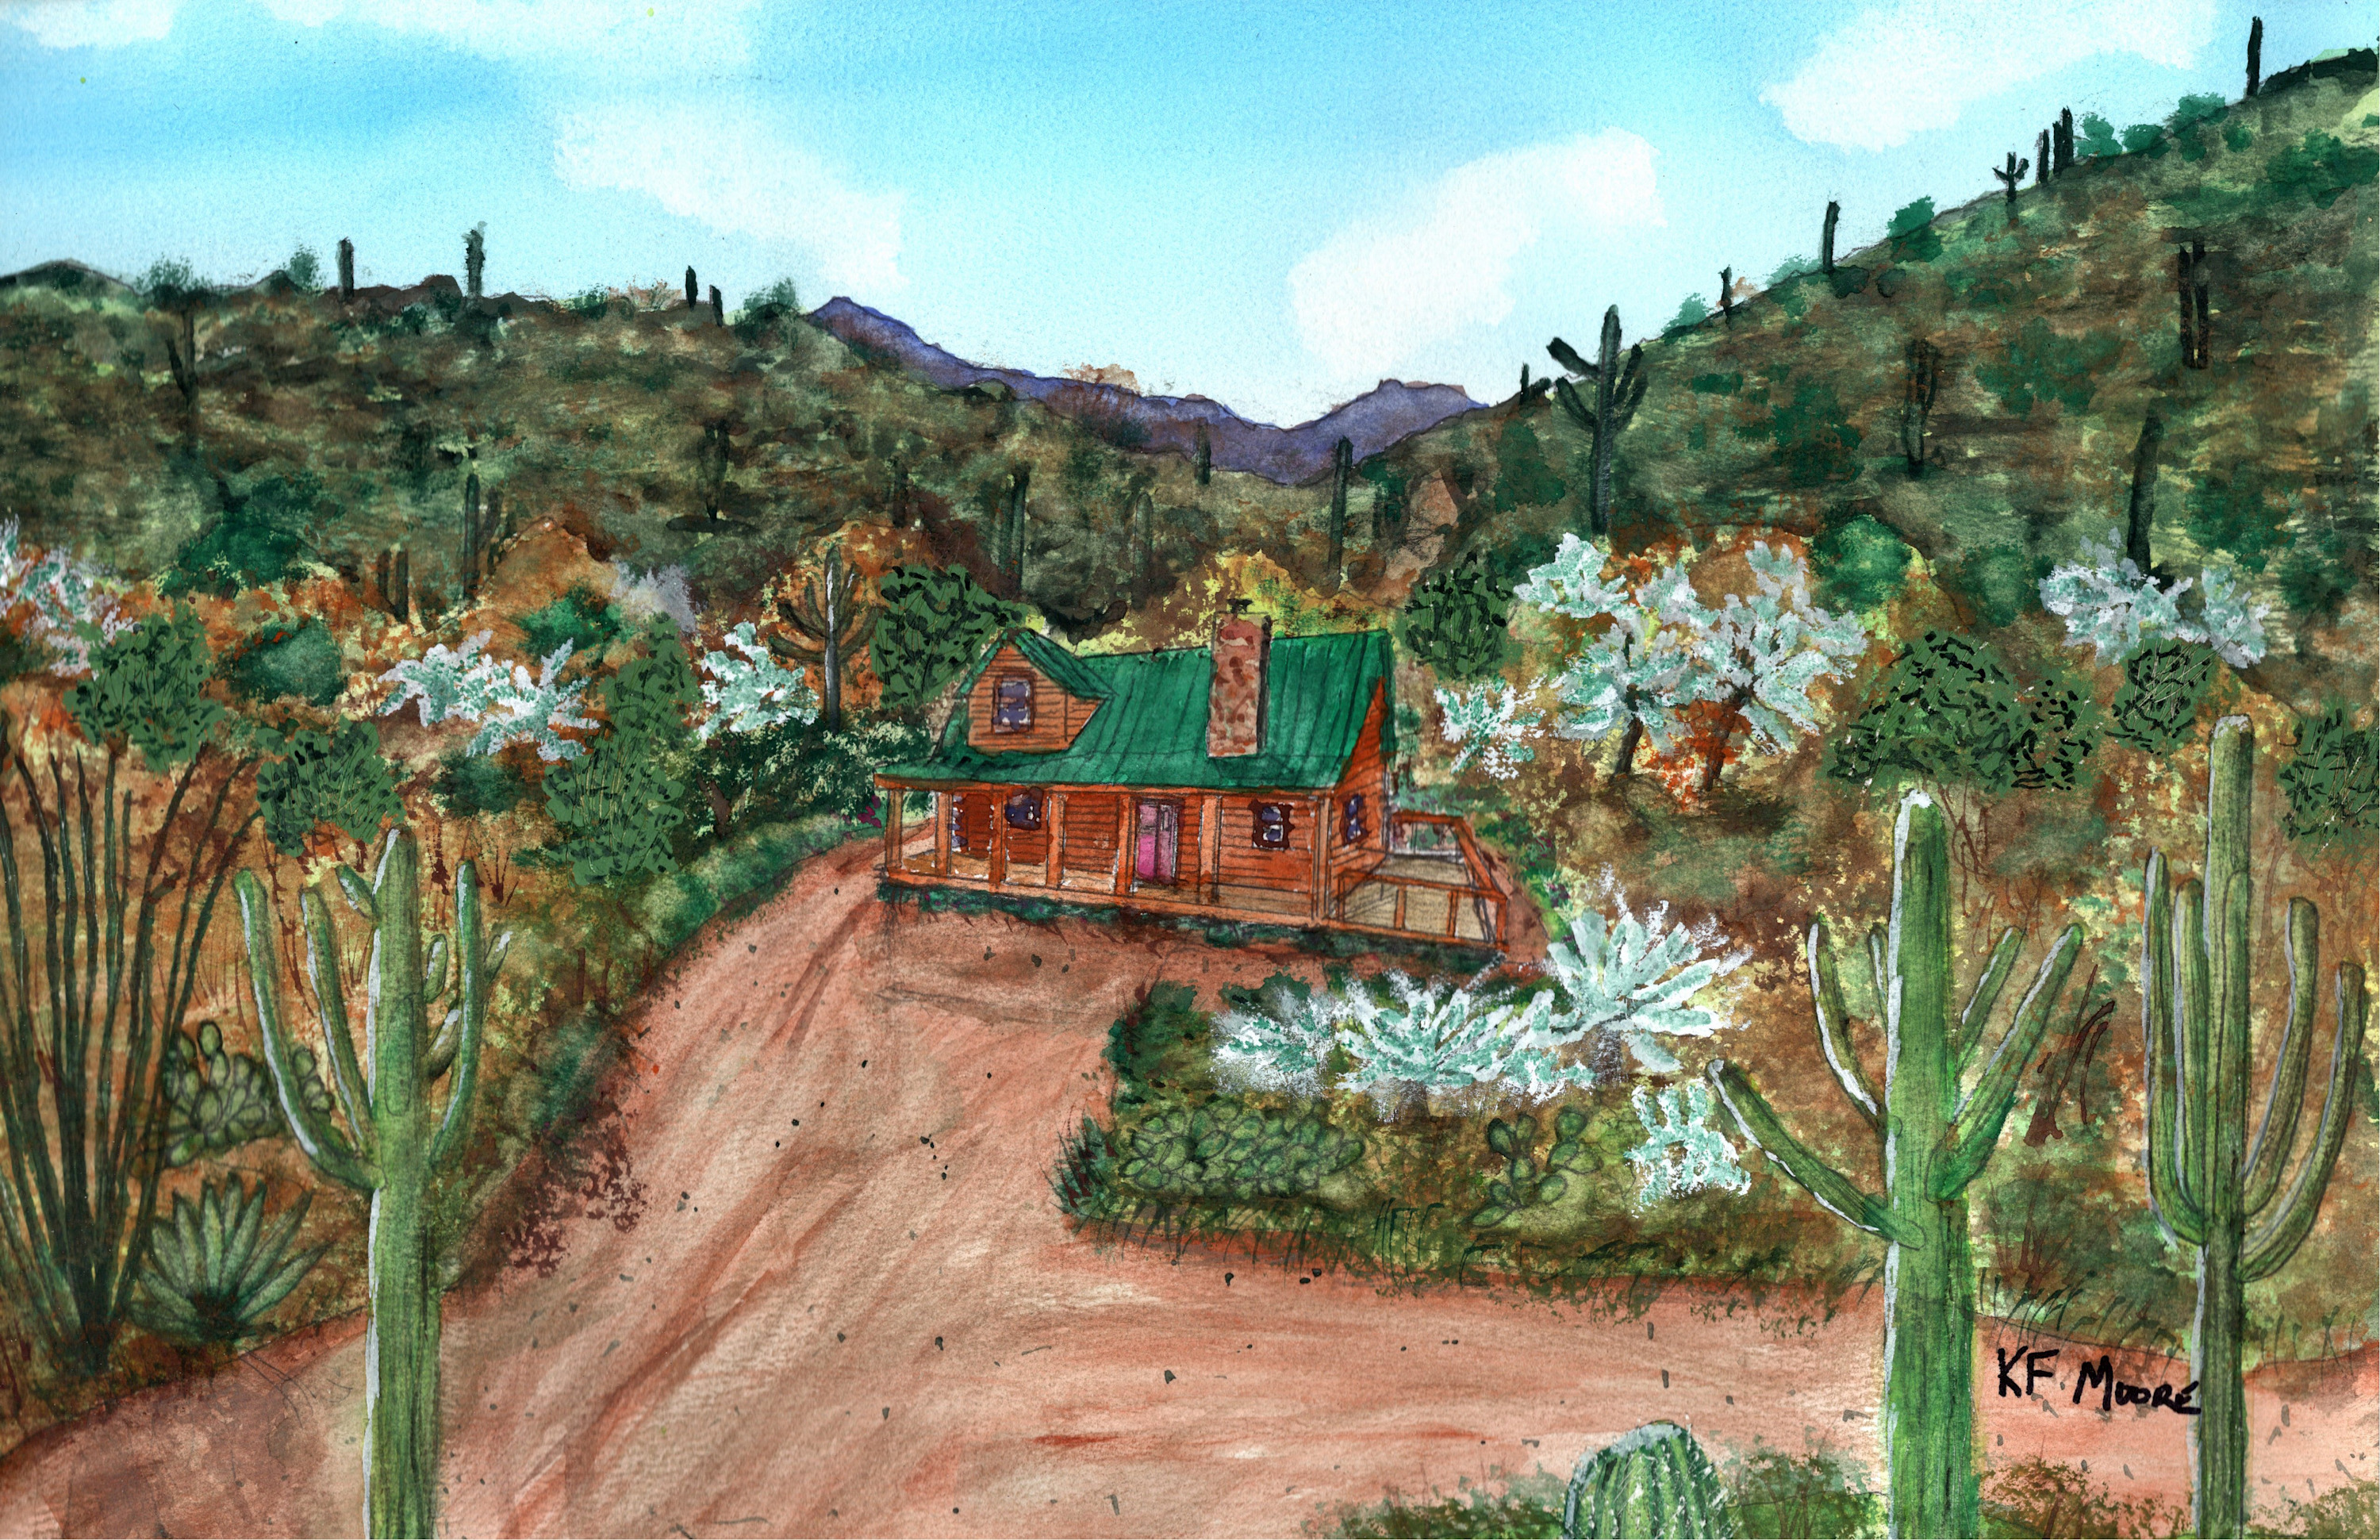 00098 log cabin cave creek commission tzydo9